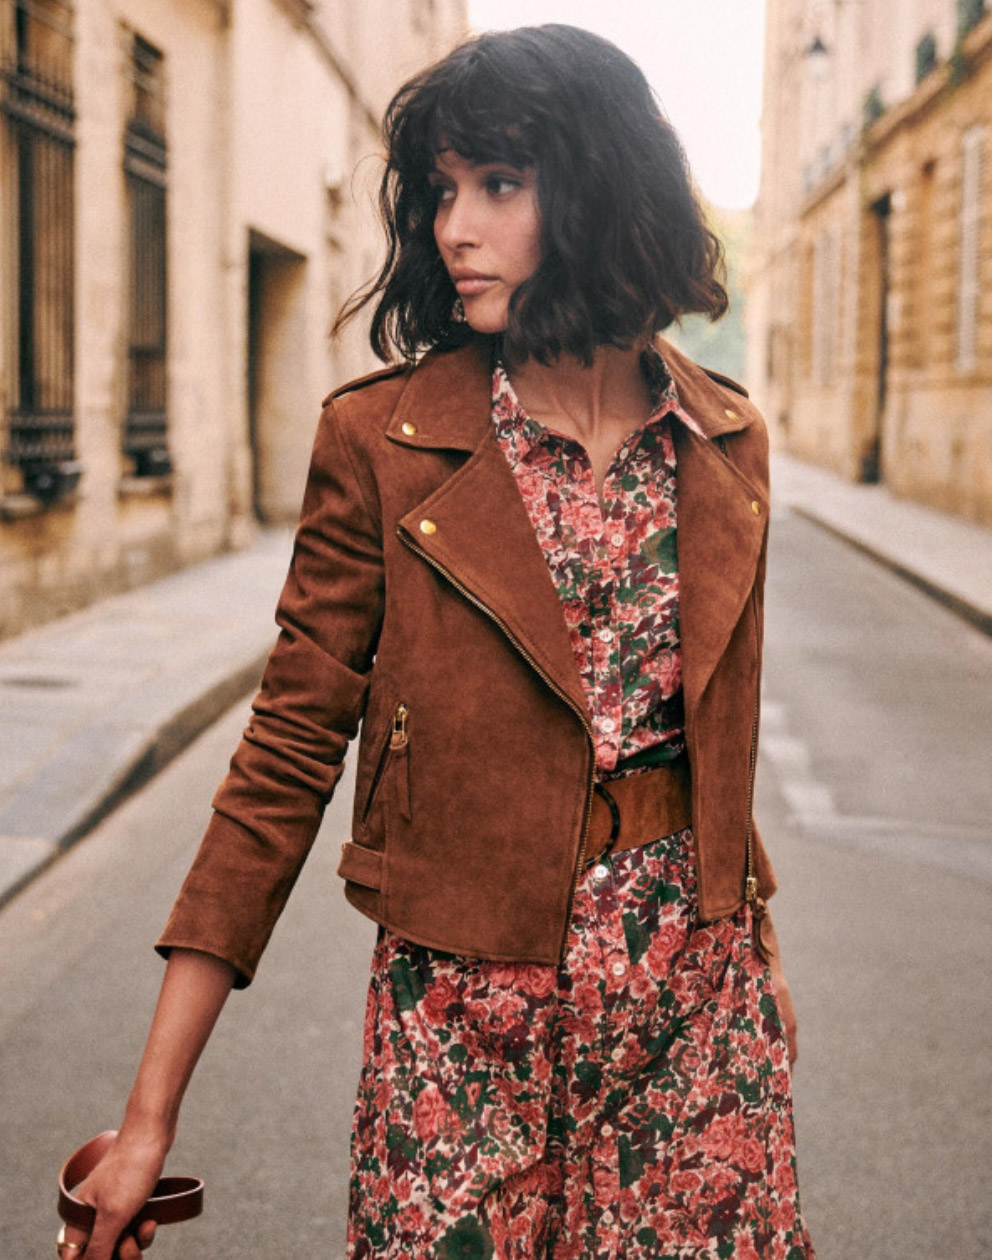 The woman biker jacket is a French staple: timeless and effortless chic! Selection of the best premium leather jacket at an affordable price - Sezane brown leather jacket